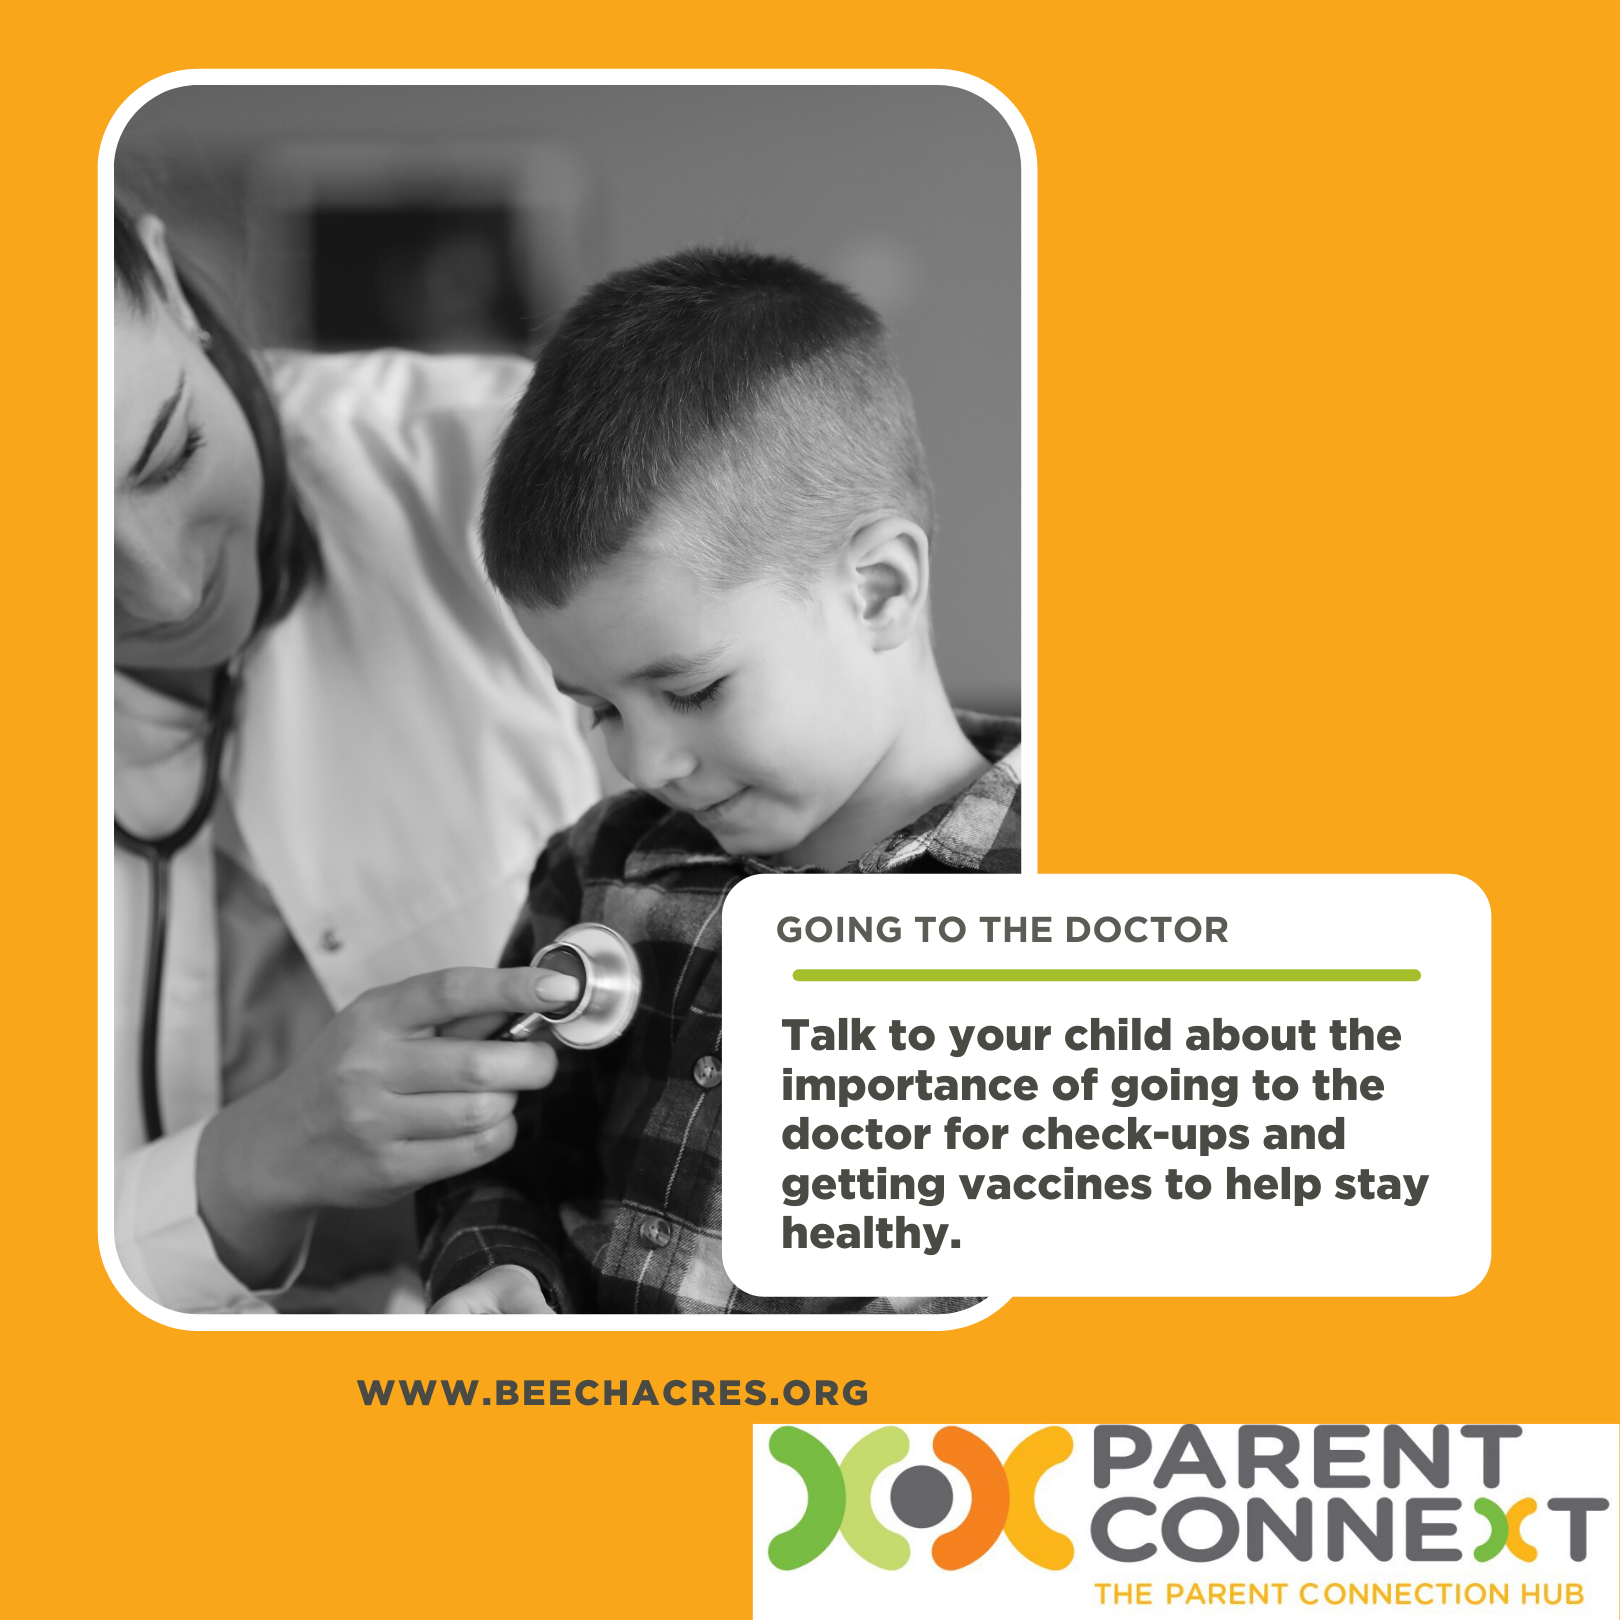 Tips for Parents To Ease Concerns About Going to the Doctor